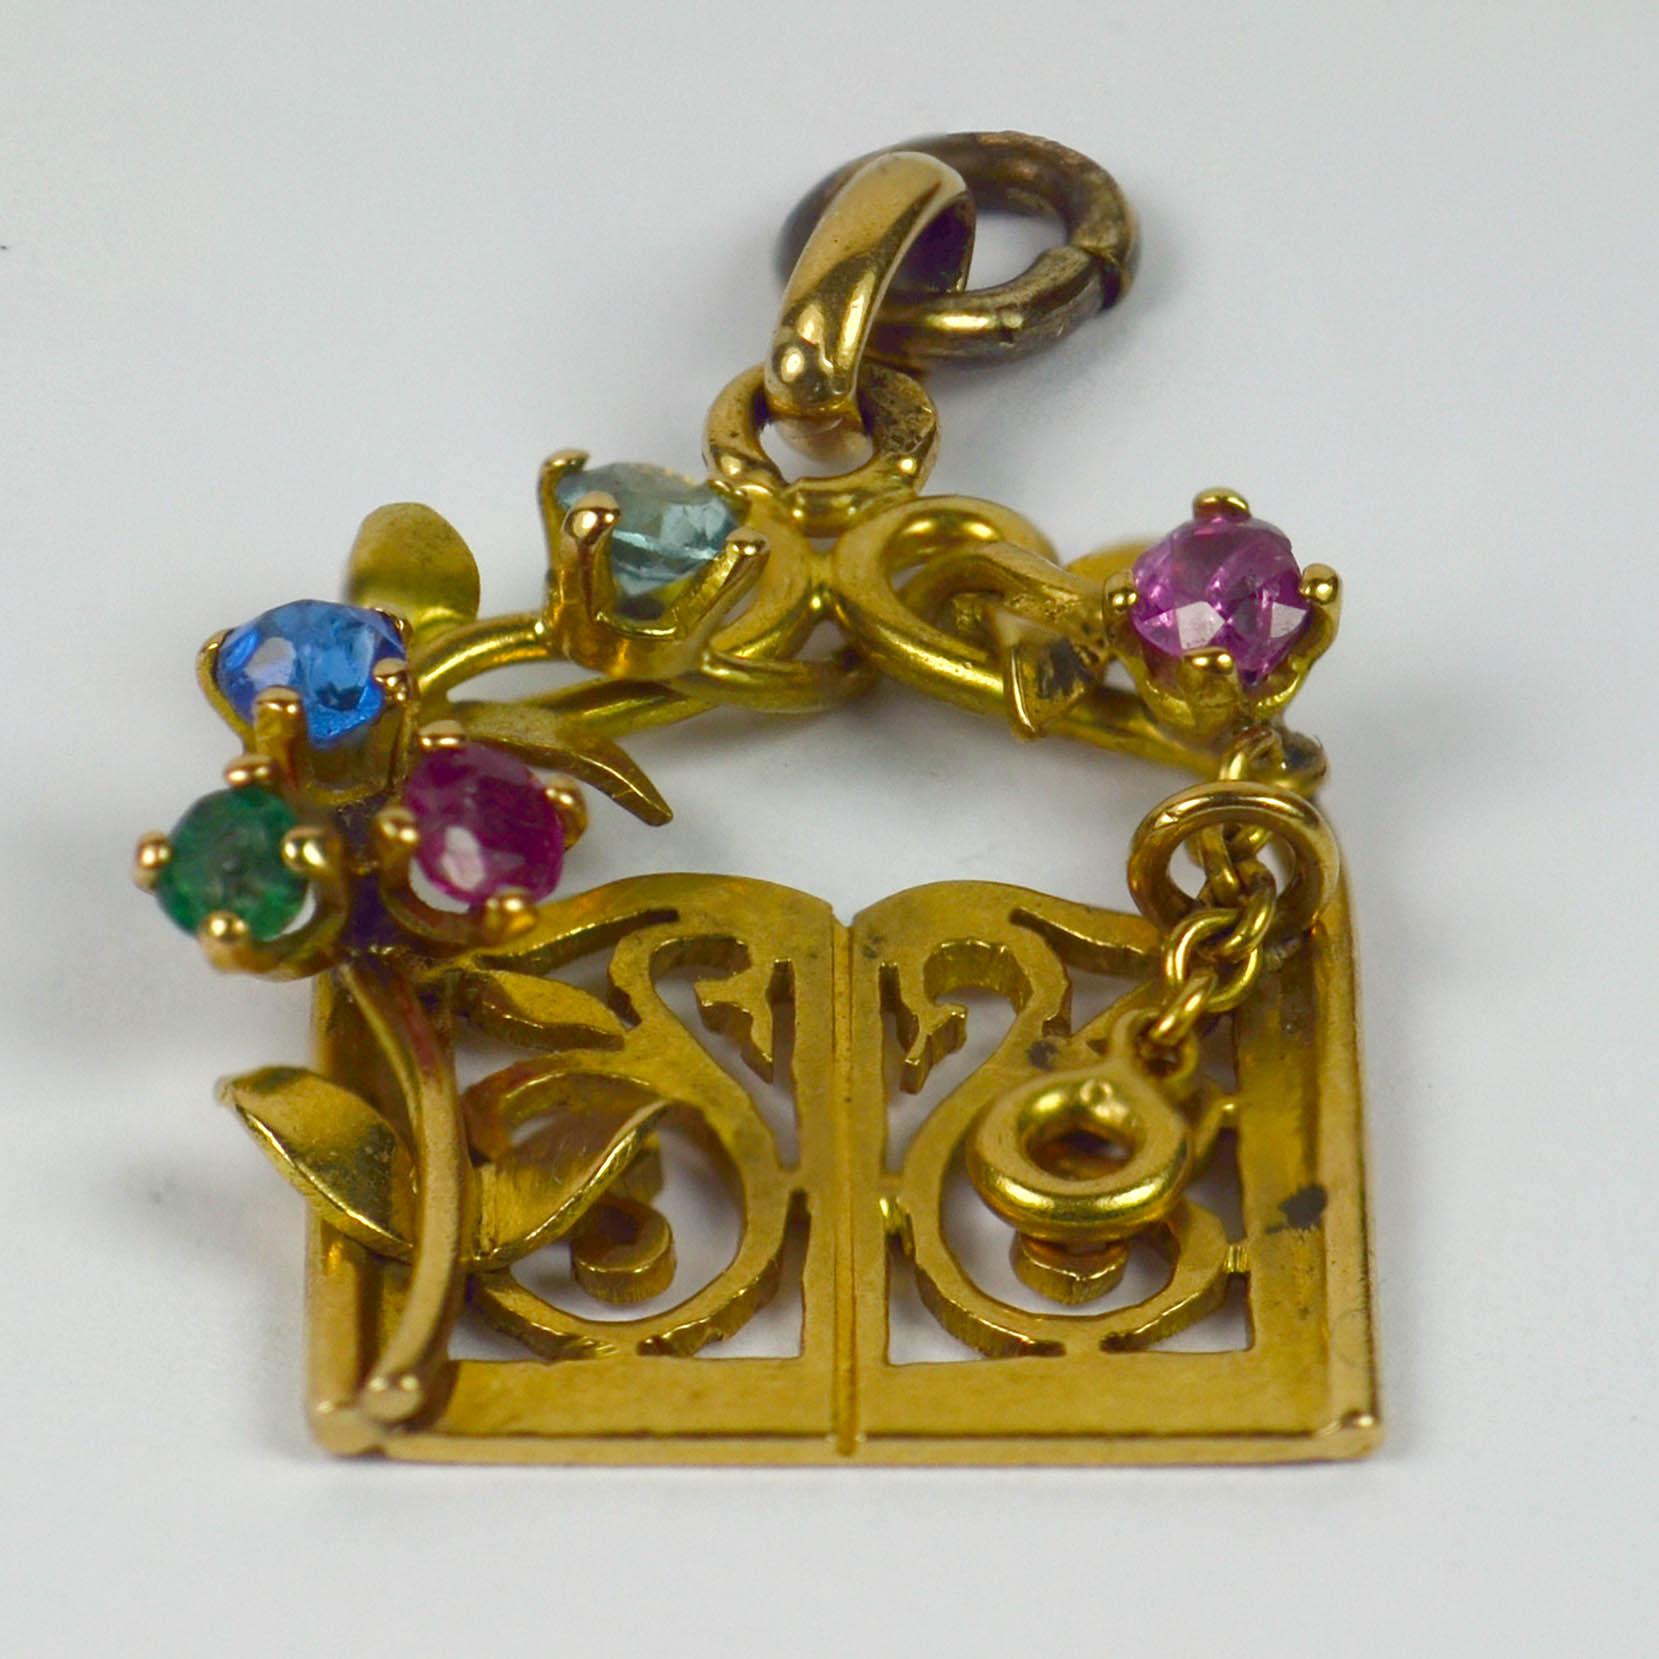 An 18 karat yellow gold charm pendant designed as a pair of garden gates with curlicue swan motif, surrounded by a gem set flowering vine. The flowers are depicted in round cut pink, red, blue and green paste. Stamped with the owl mark for French